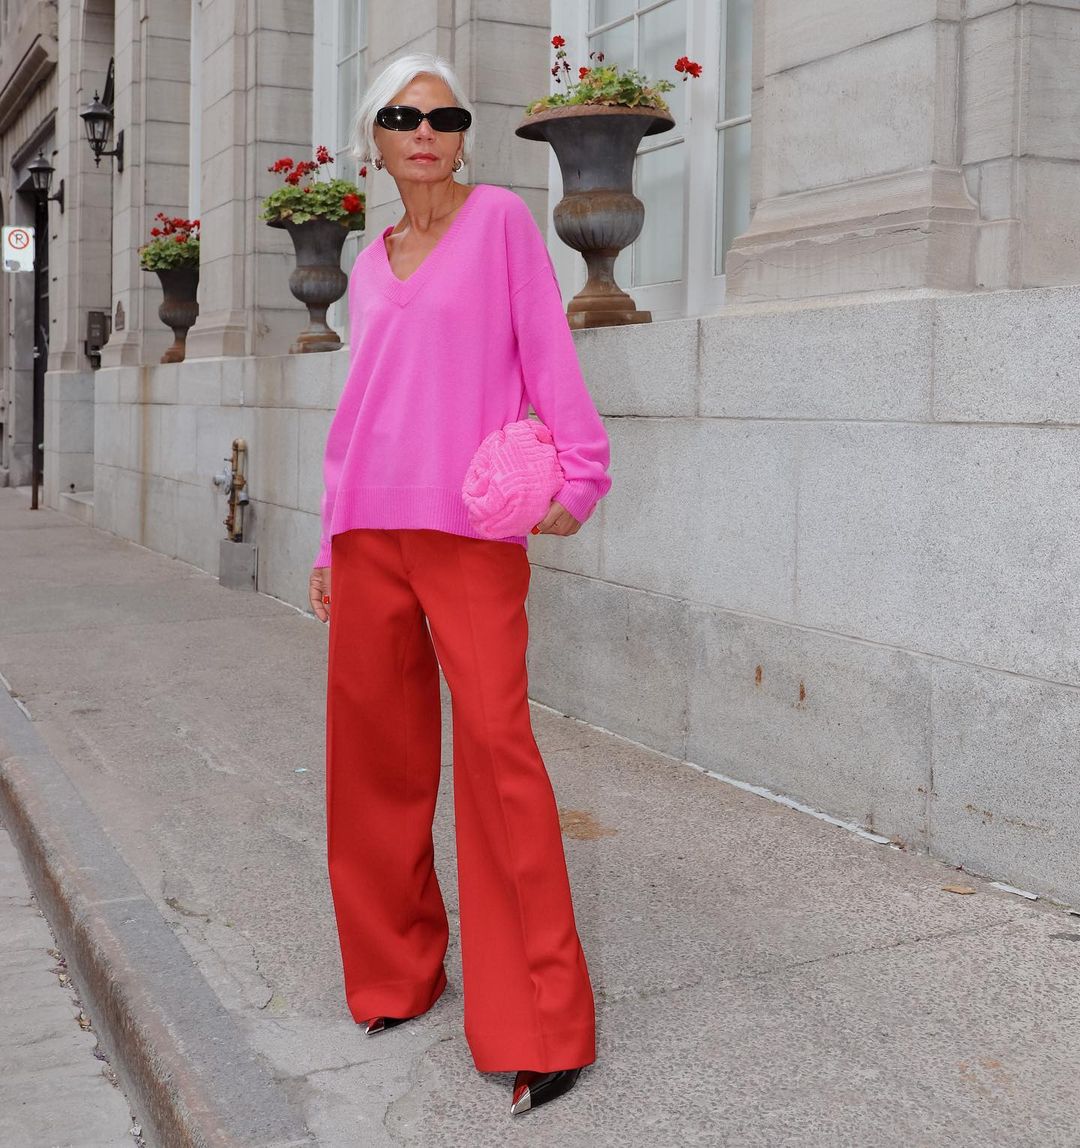 How to Dress in Your 40s, According to Fashionable Women | Who What Wear UK